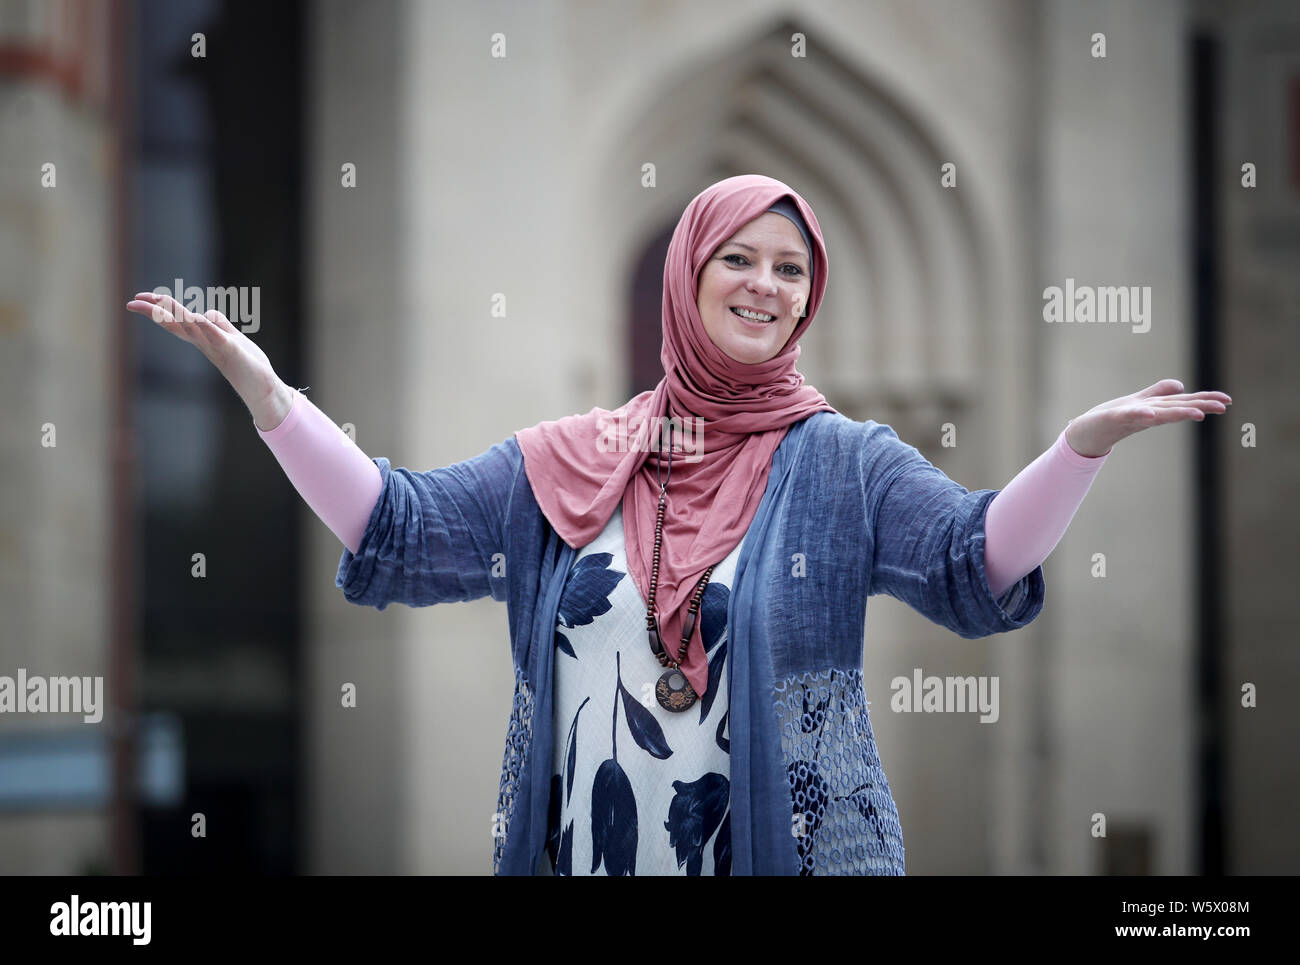 Journalist and human rights activist Lauren Booth outside Edinburgh Central Mosque ahead of her Edinburgh Fringe one woman show 'Accidentally Muslim' which will be performed at the Gilded Balloon throughout the Edinburgh Festival. Stock Photo